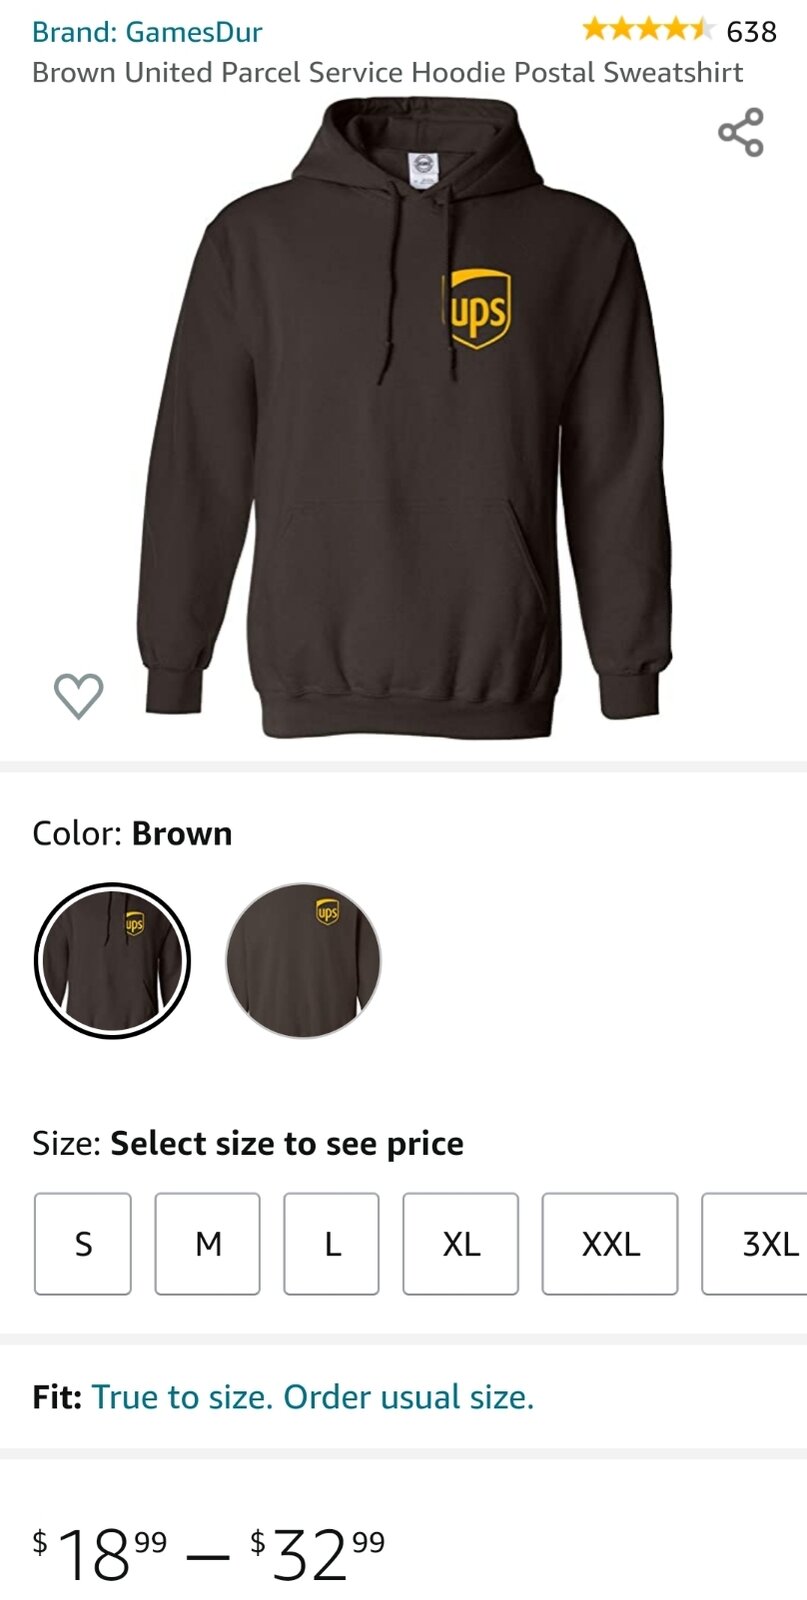 Brown Hoodies | UPS Discussions | BrownCafe - UPSers talking about UPS ...